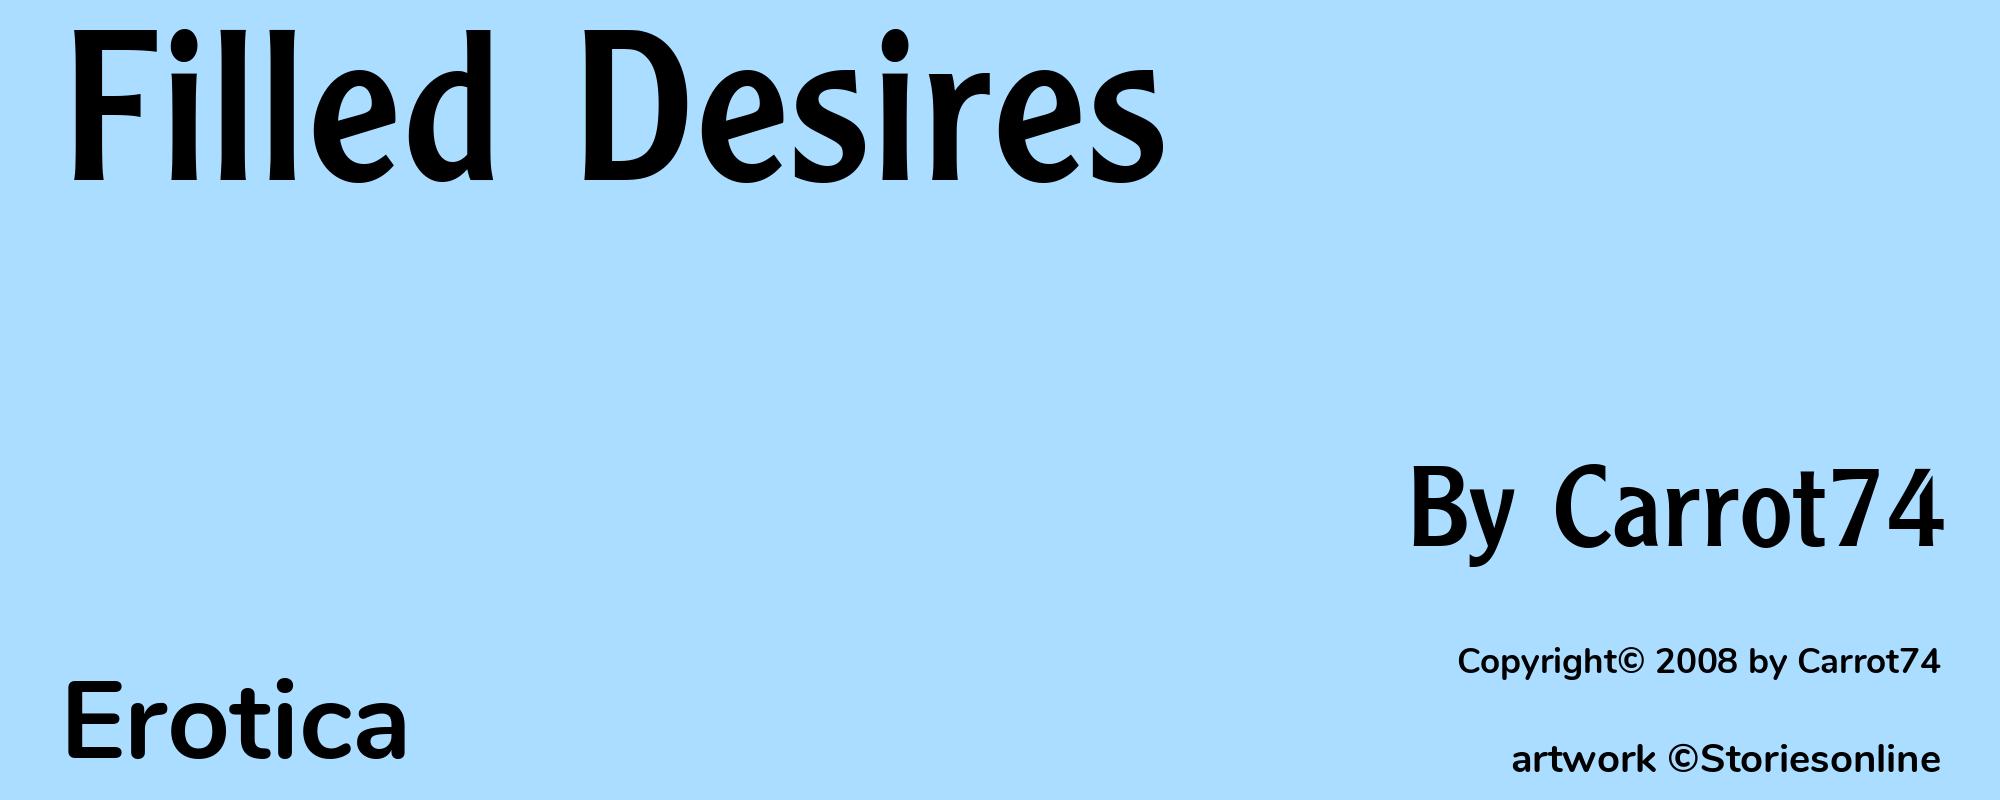 Filled Desires - Cover